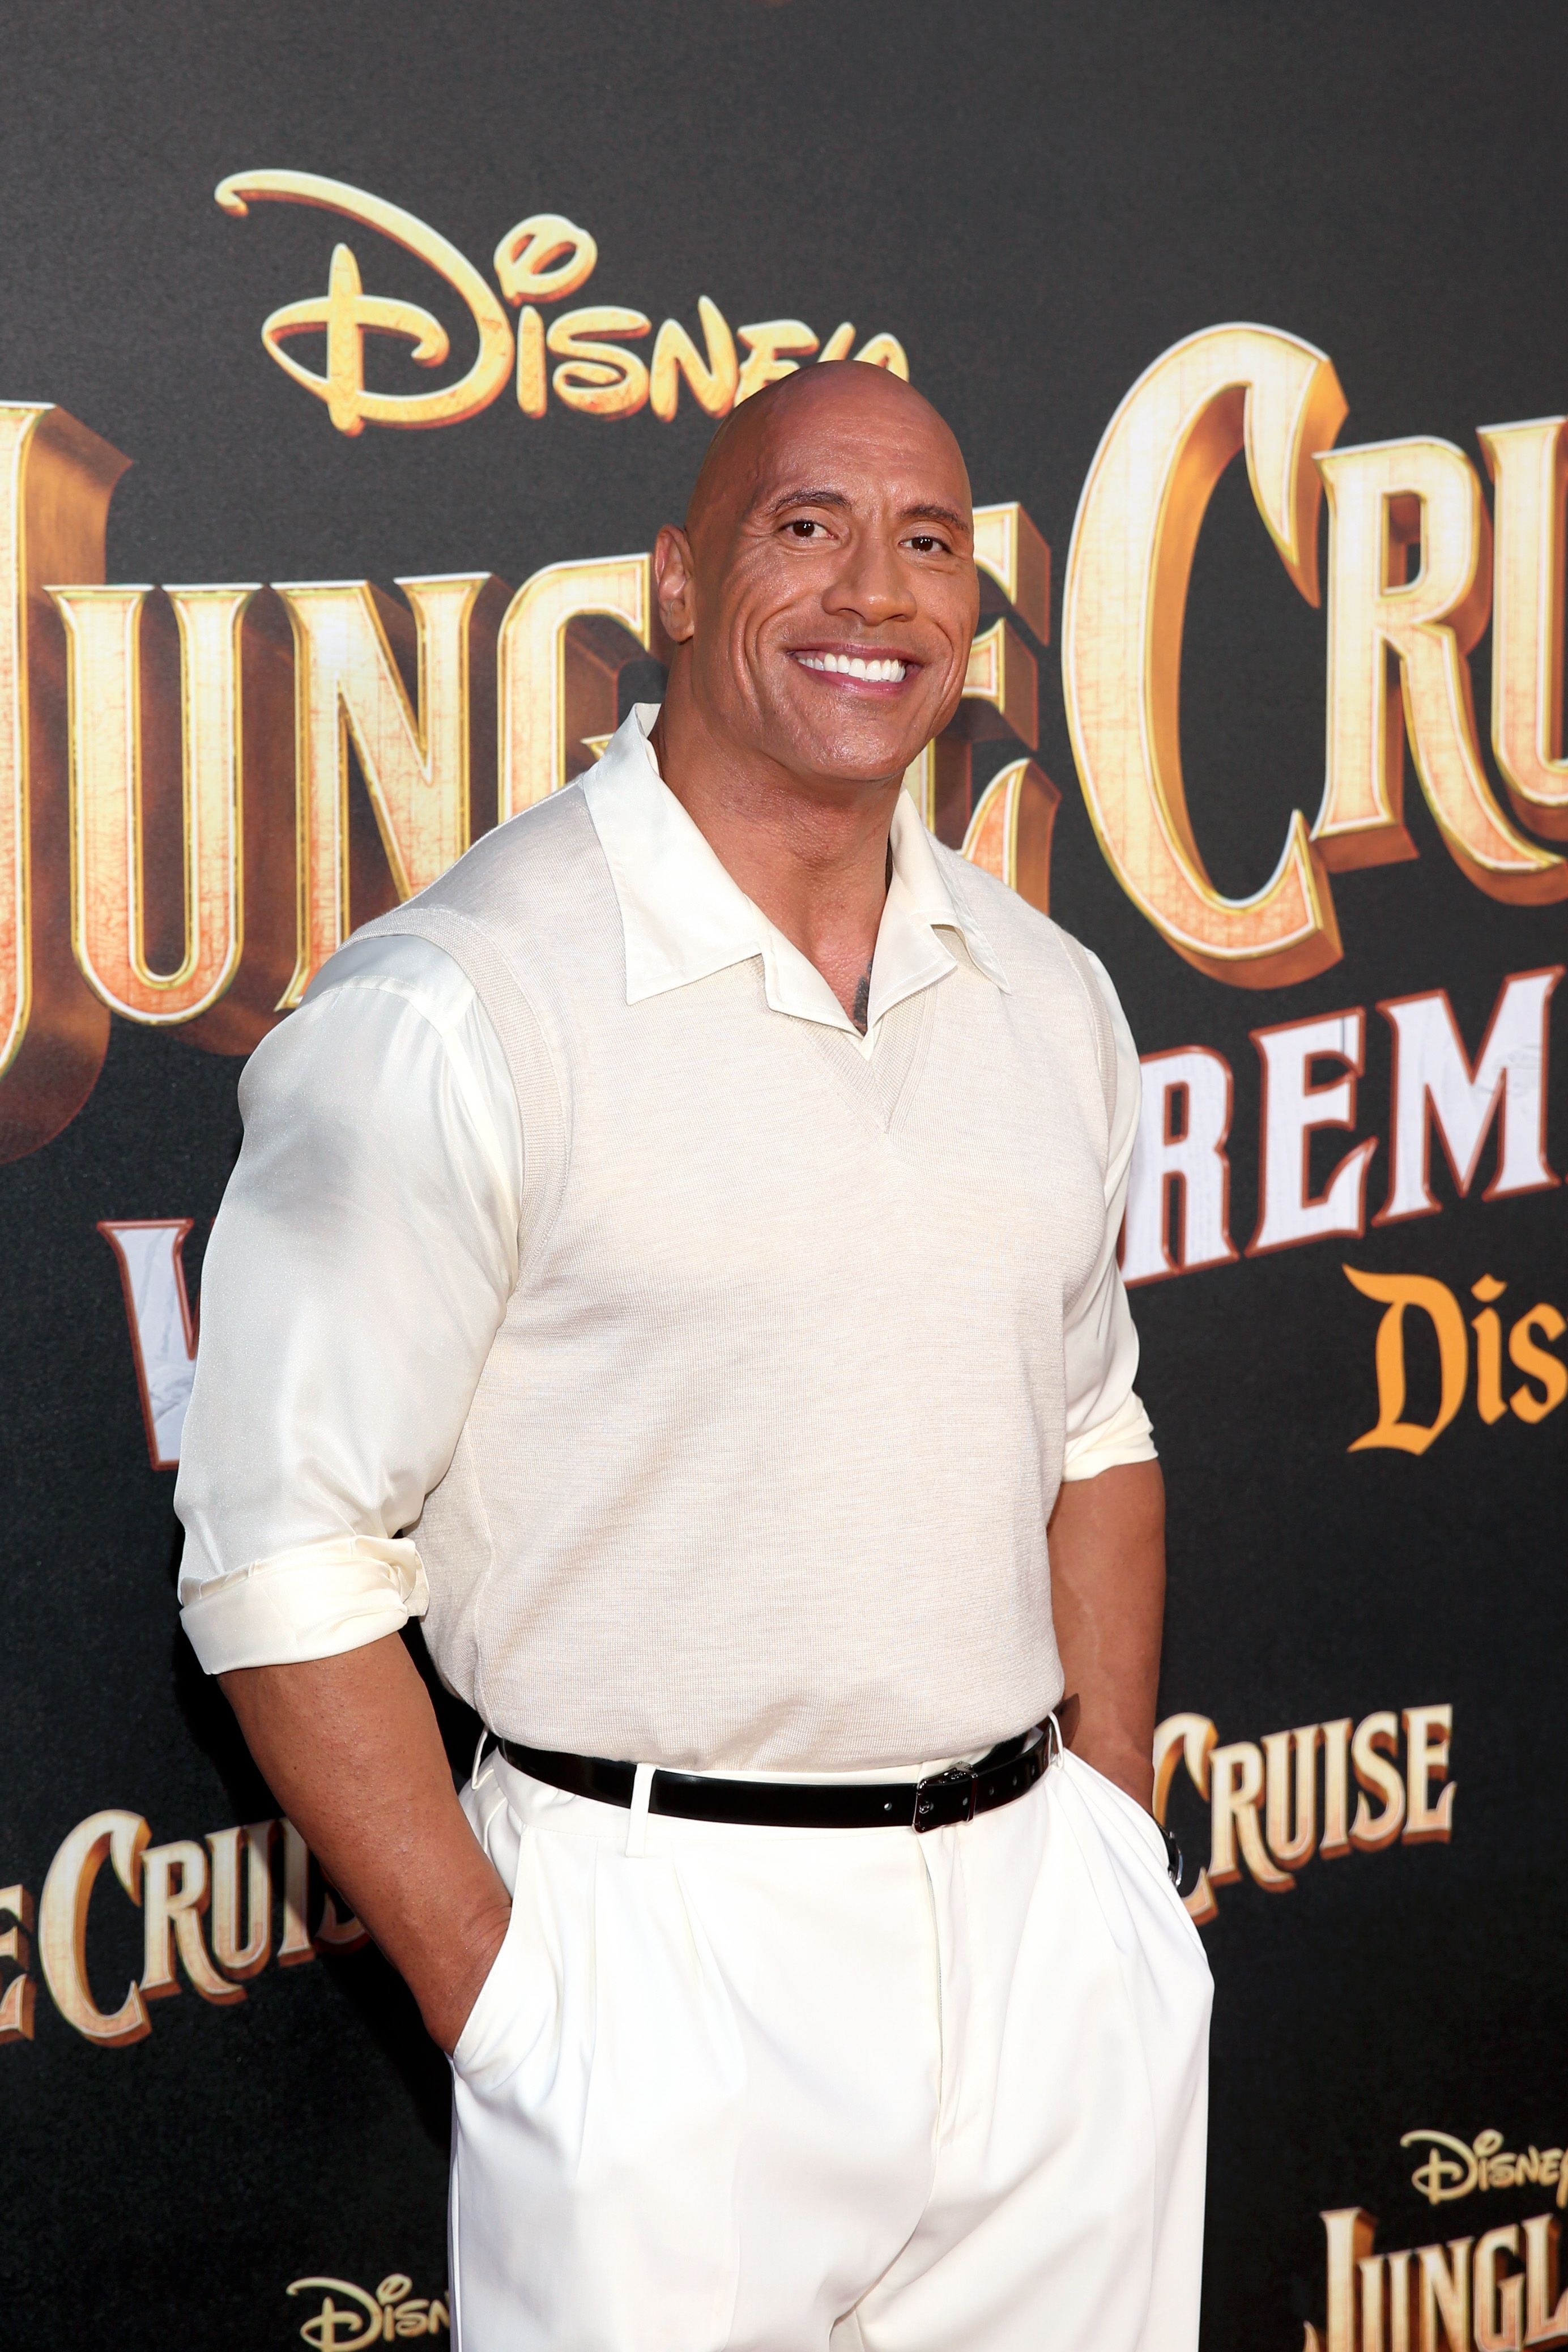 Dwayne with his hands in his pockets